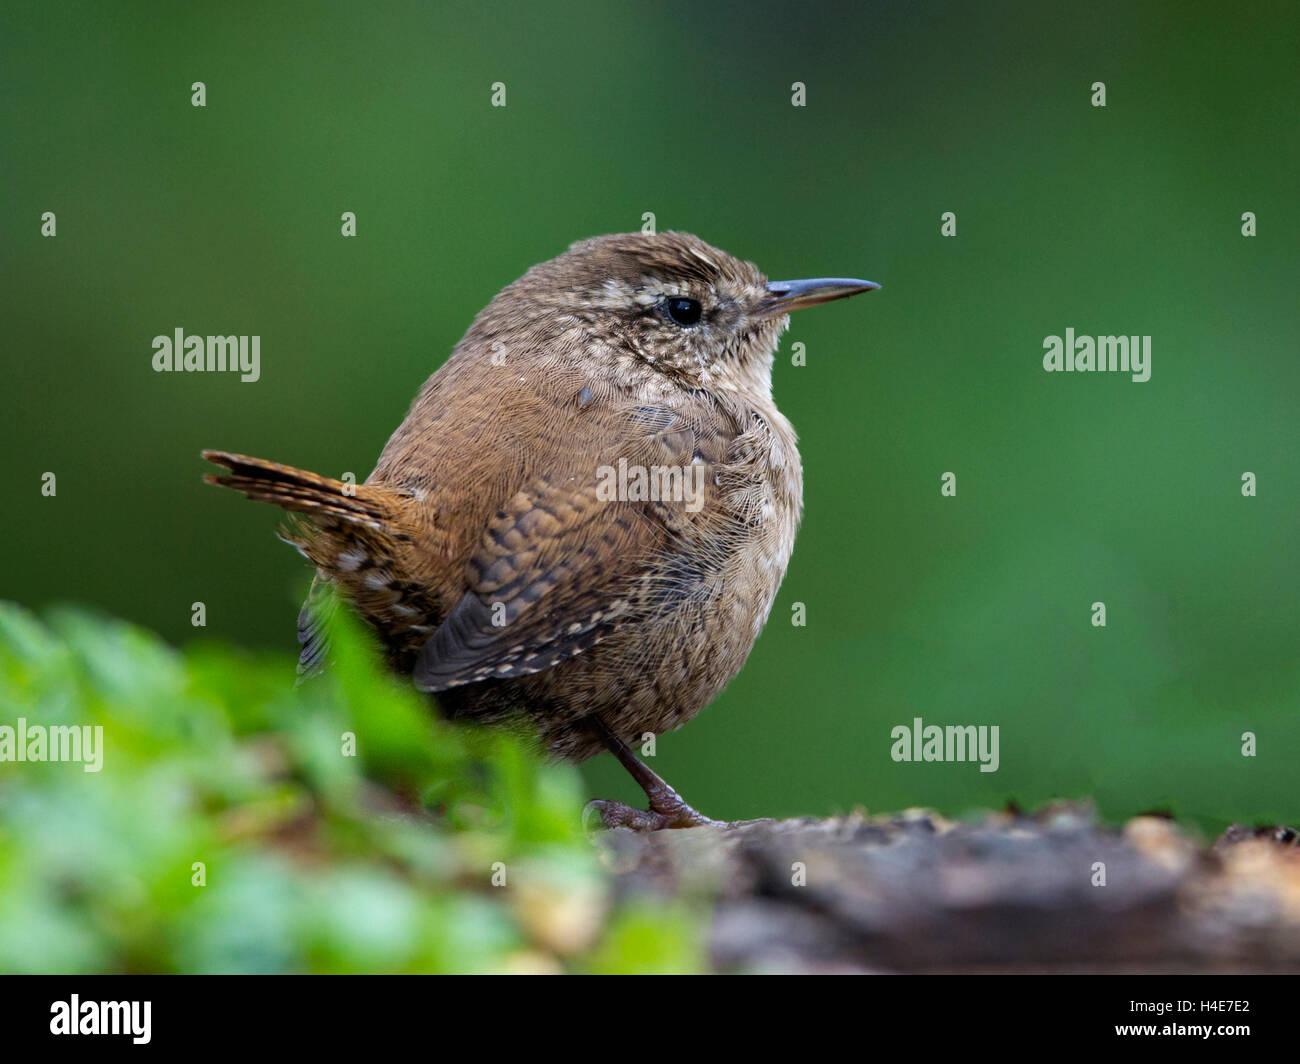 Wren perched on branch Stock Photo